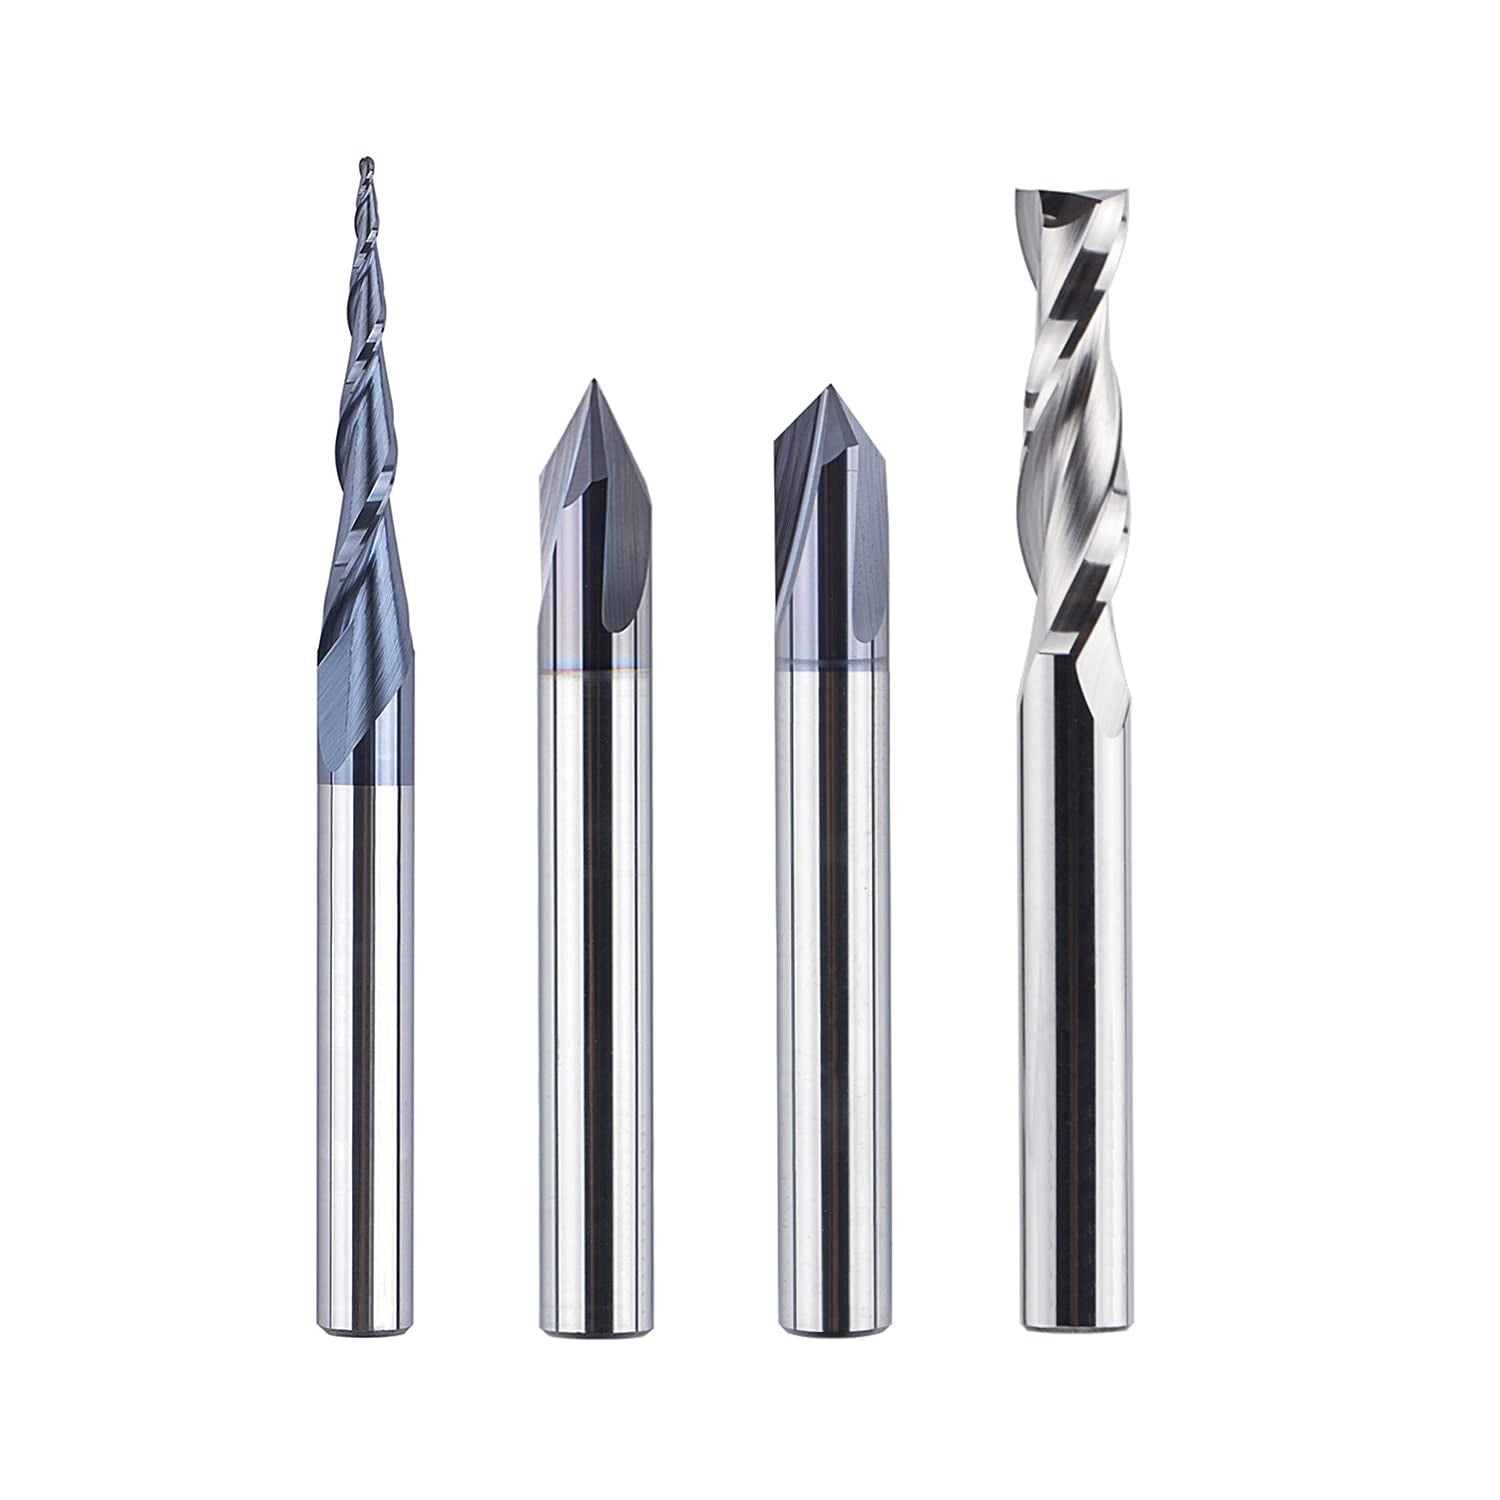 SpeTool EU WD-1 Set of 4 Milling Cutters 6 mm Shank Solid Carbide Solid Carbide CNC Milling Cutter V-Groove Cutter for Wood Engraving